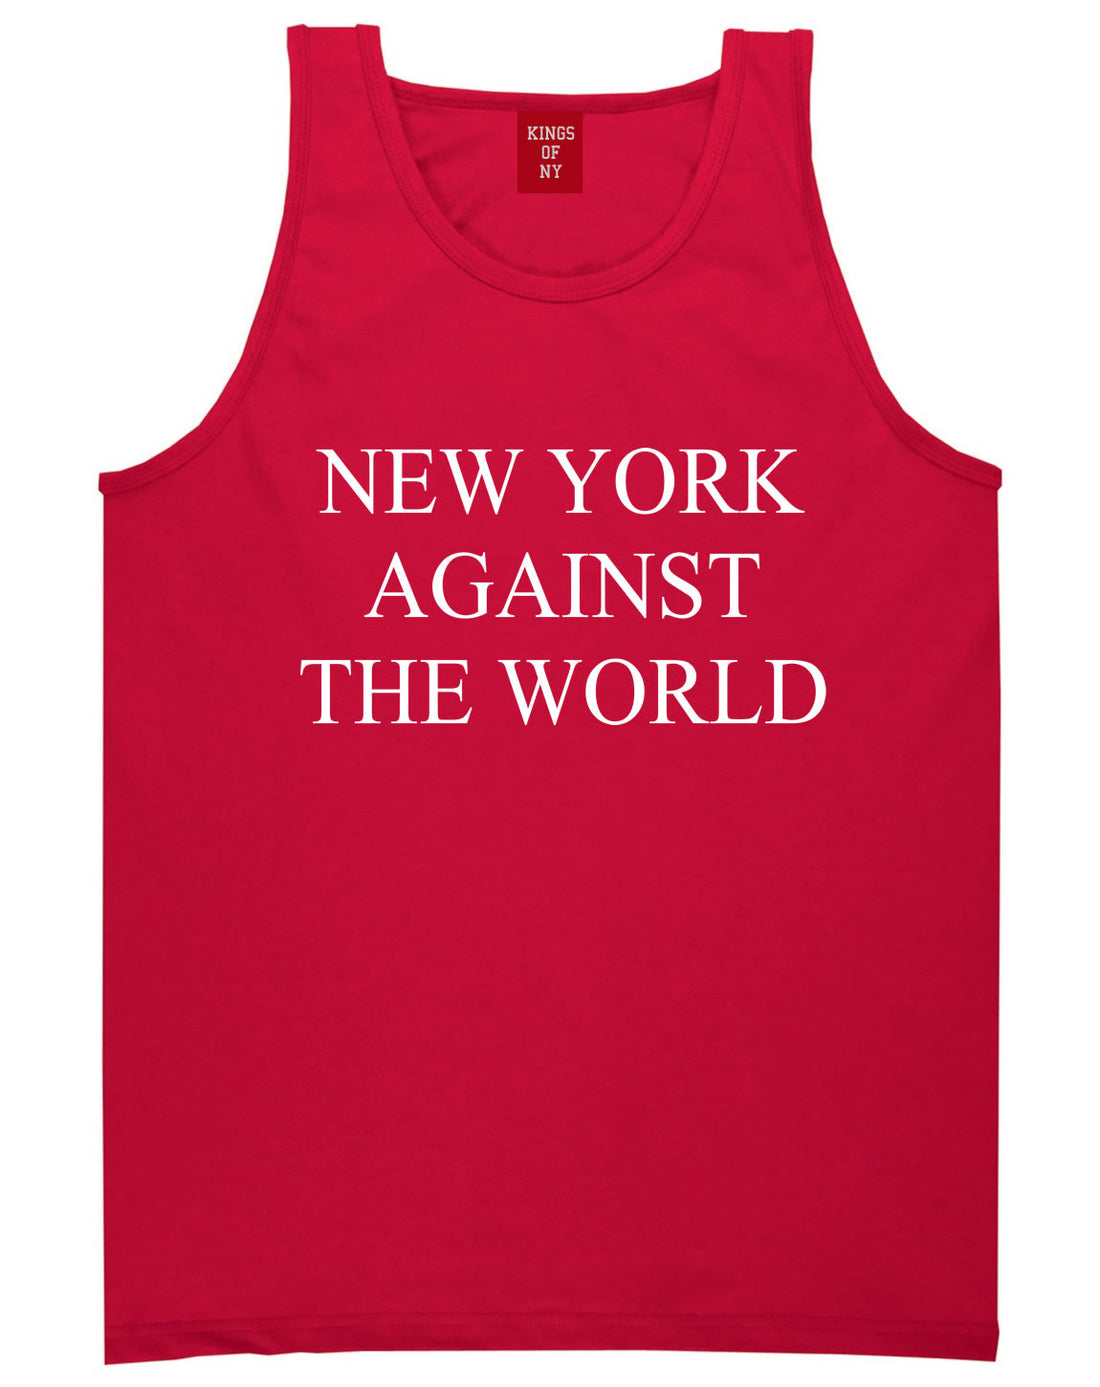 New York Against The World Tank Top in Red by Kings Of NY